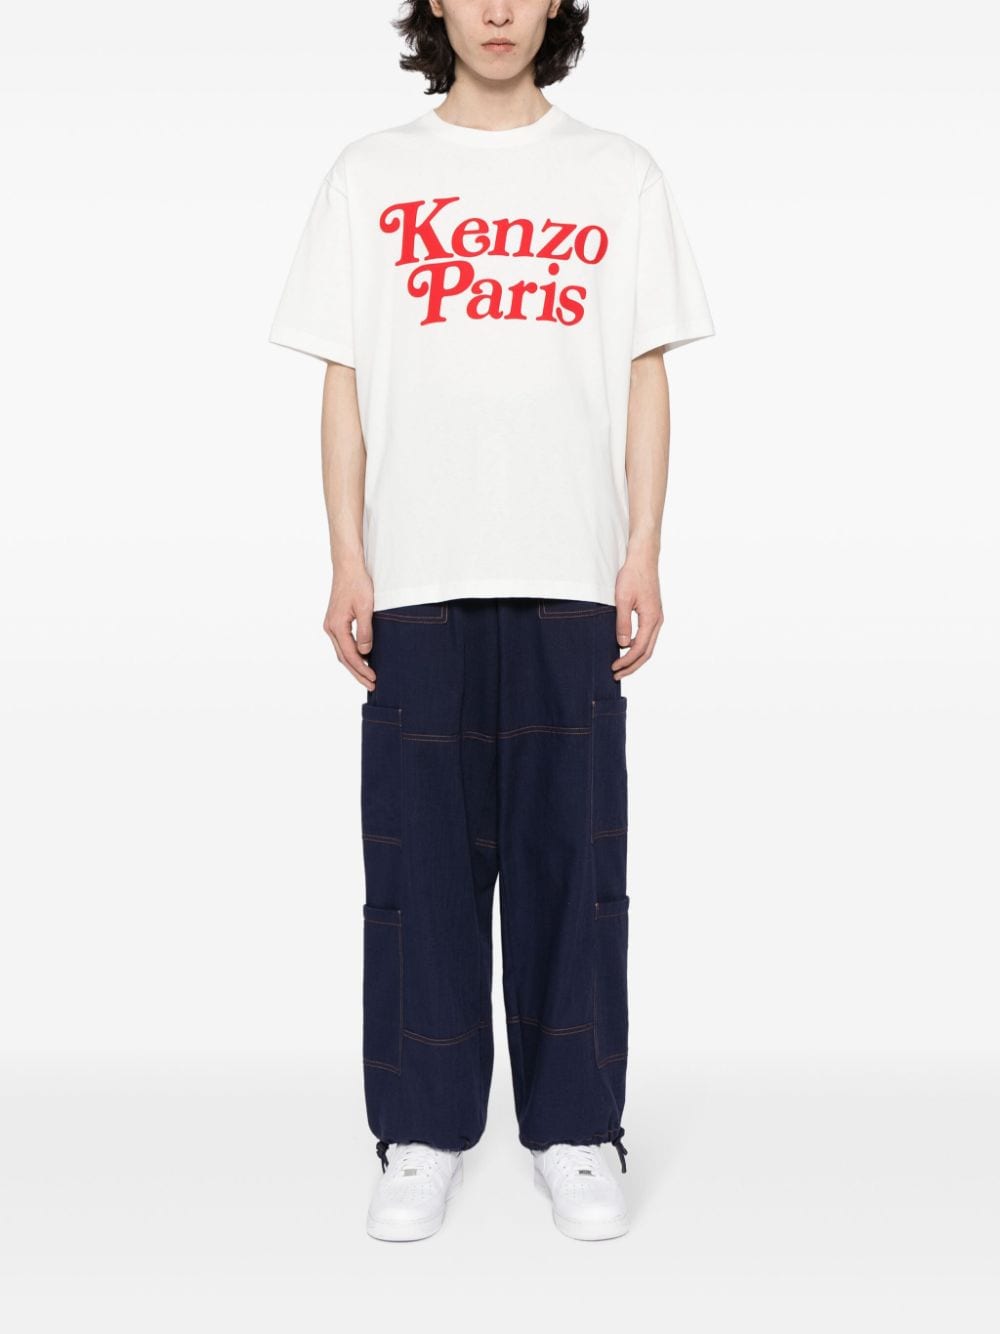 Kenzo by Verdy cotton T-shirt - Wit